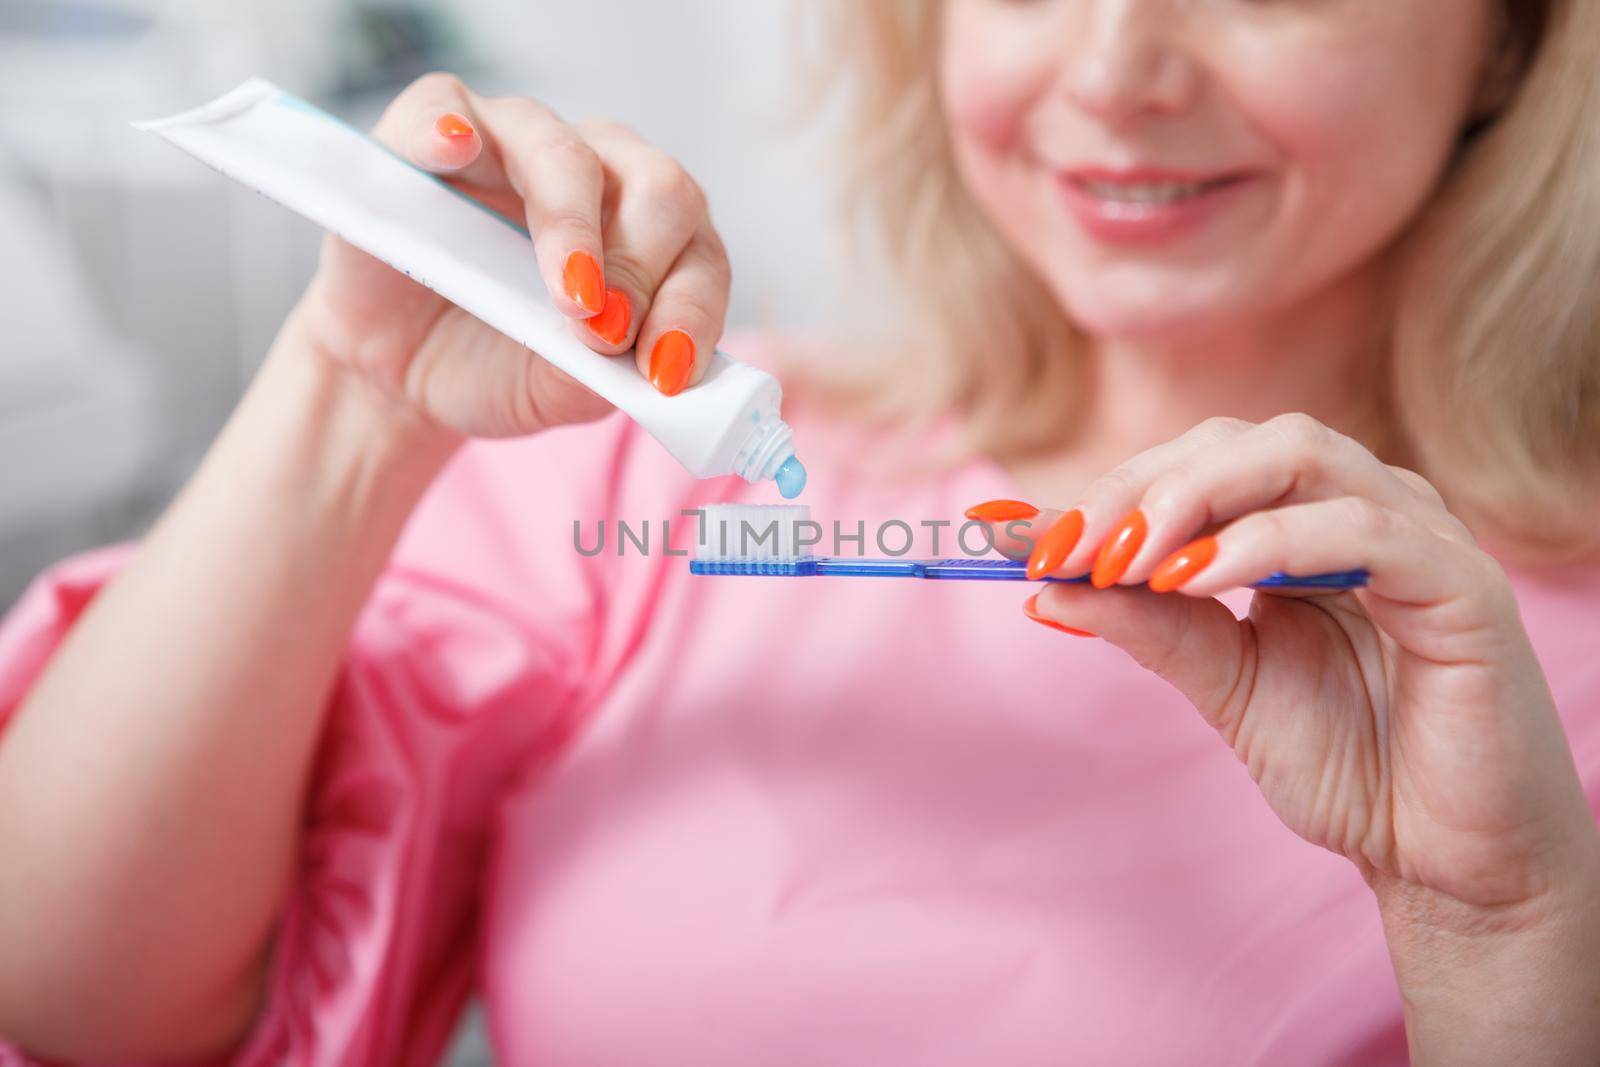 Mature woman at dental clinic by MAD_Production